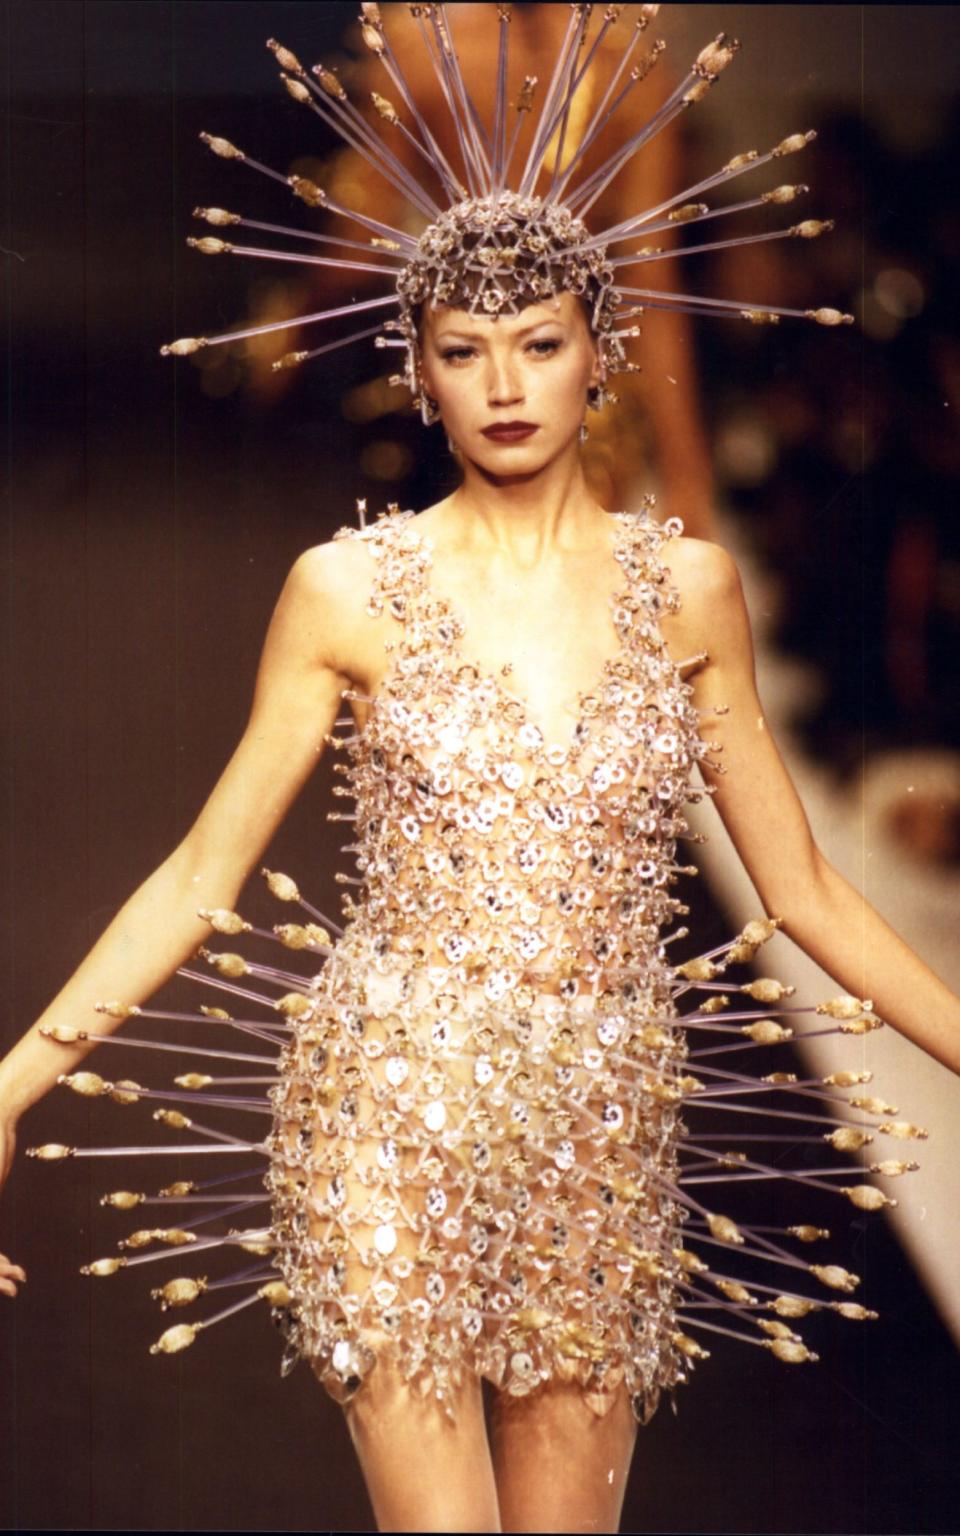 The original incarnation of the Paco Rabanne piece, being modelled on the Paris catwalk in 1996